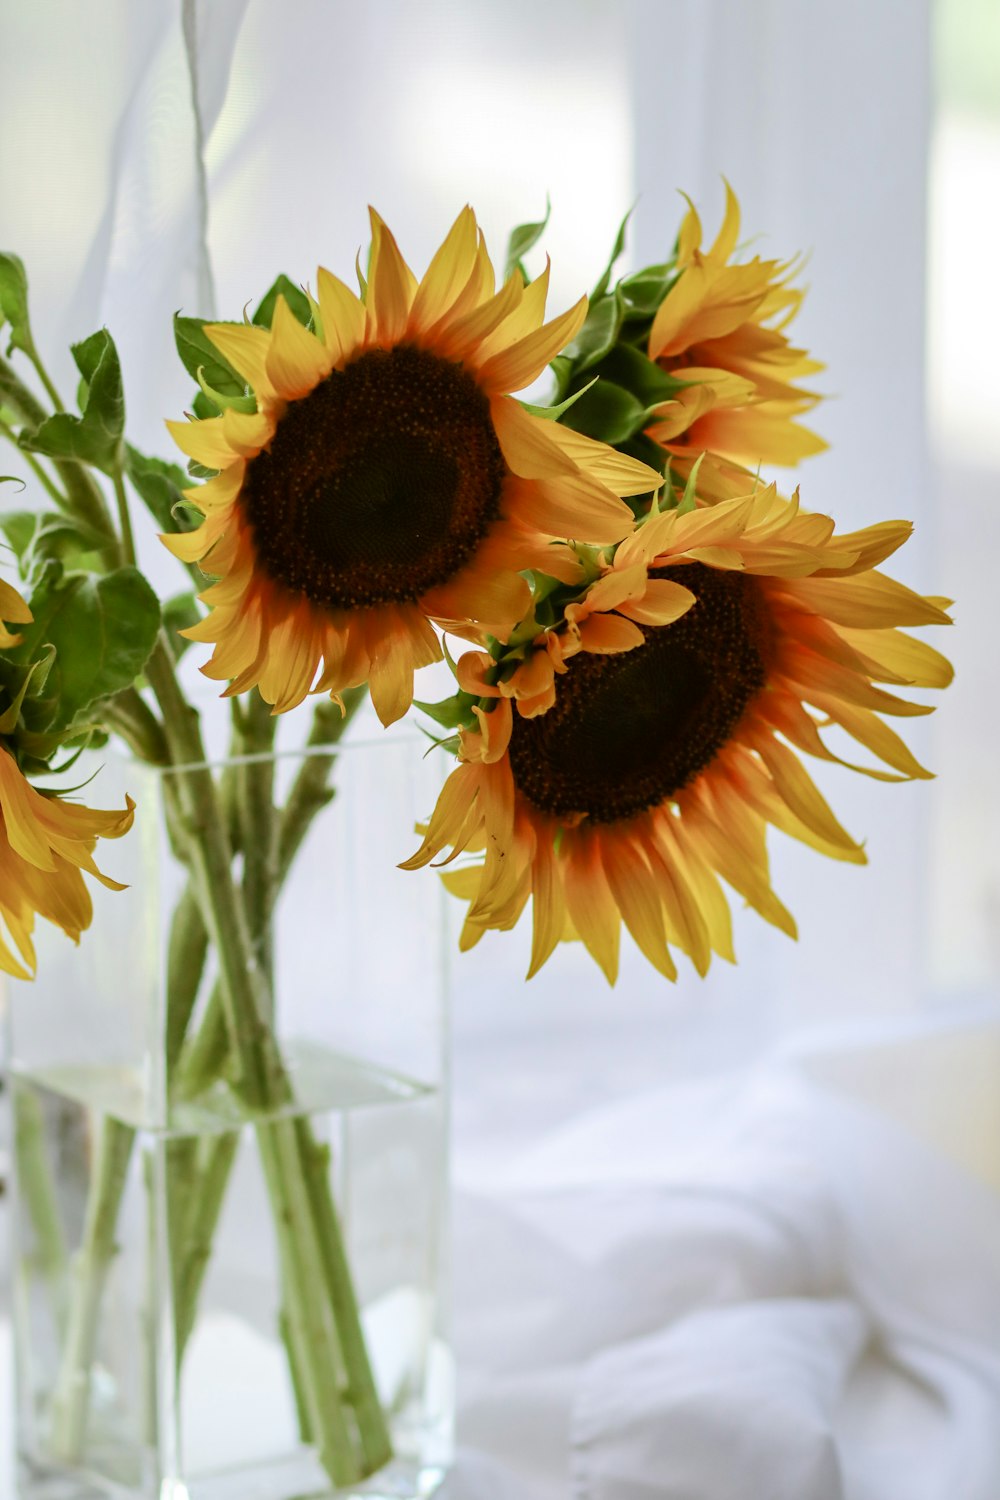 Sunflower In Clear Glass Vase Photo – Free Brown Image On Unsplash